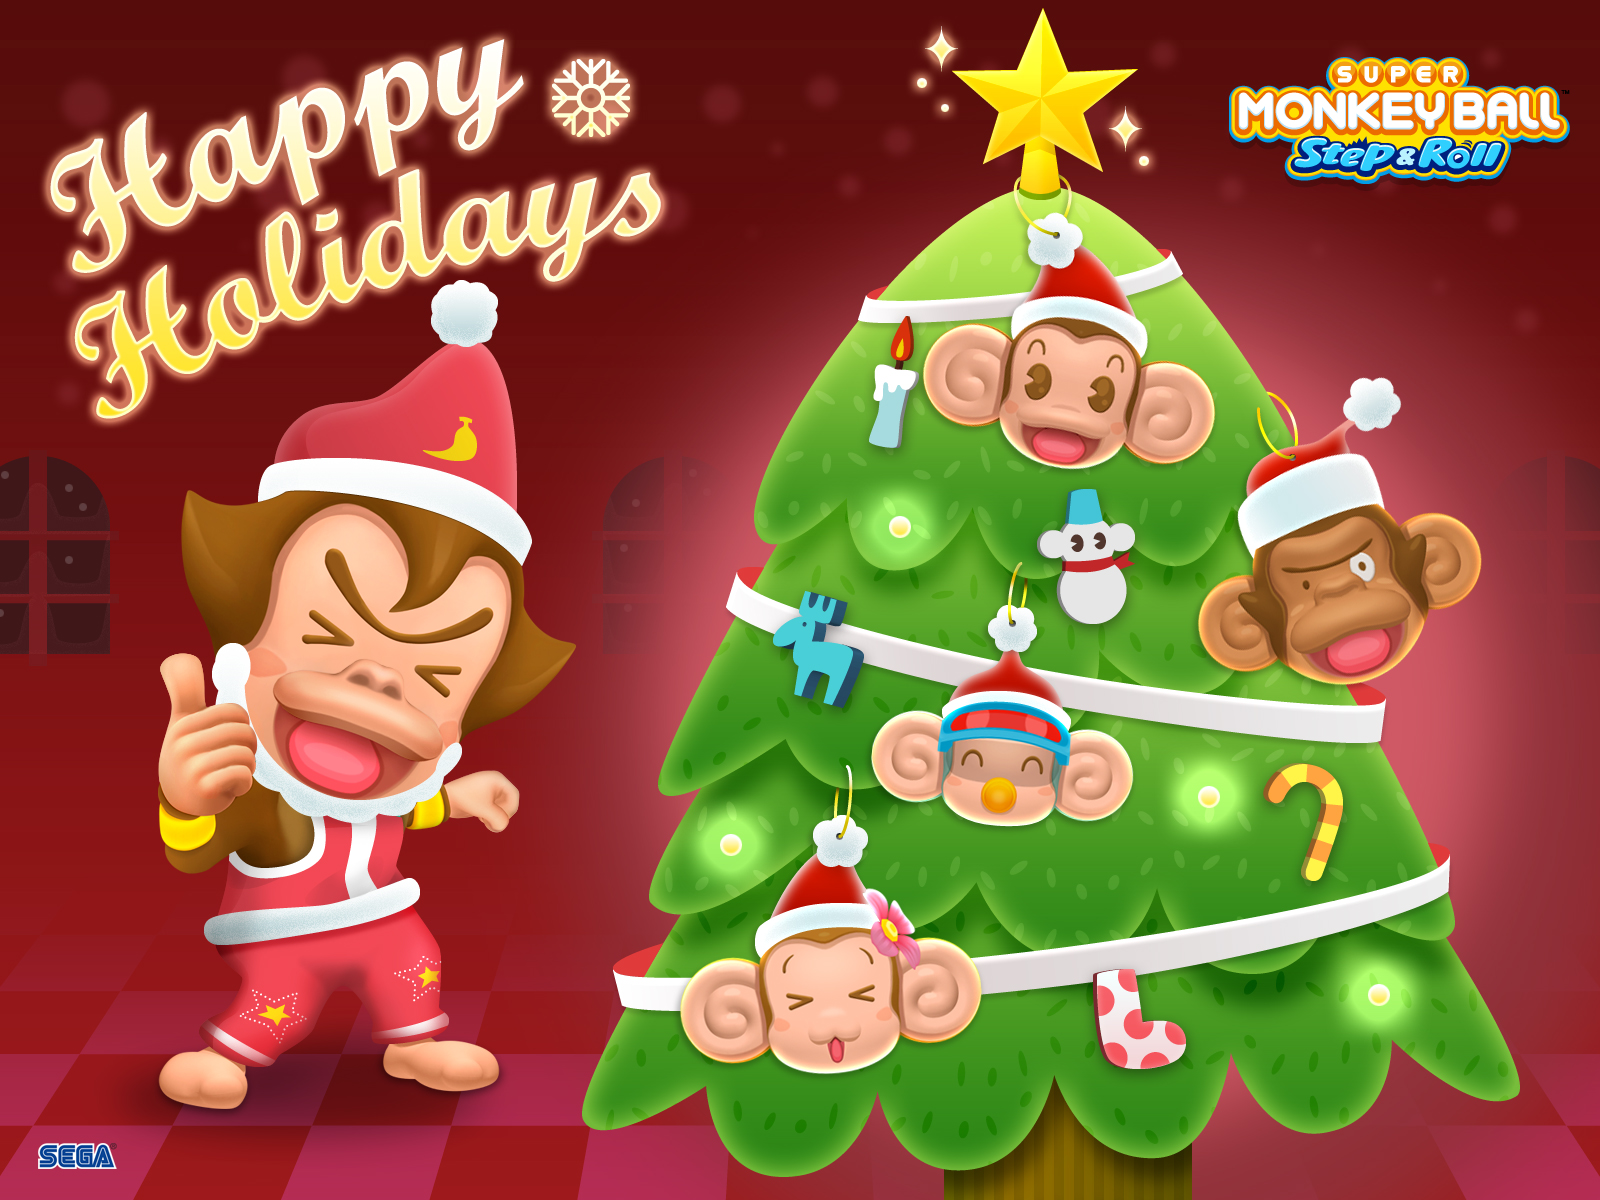 monkey ball step and roll download free